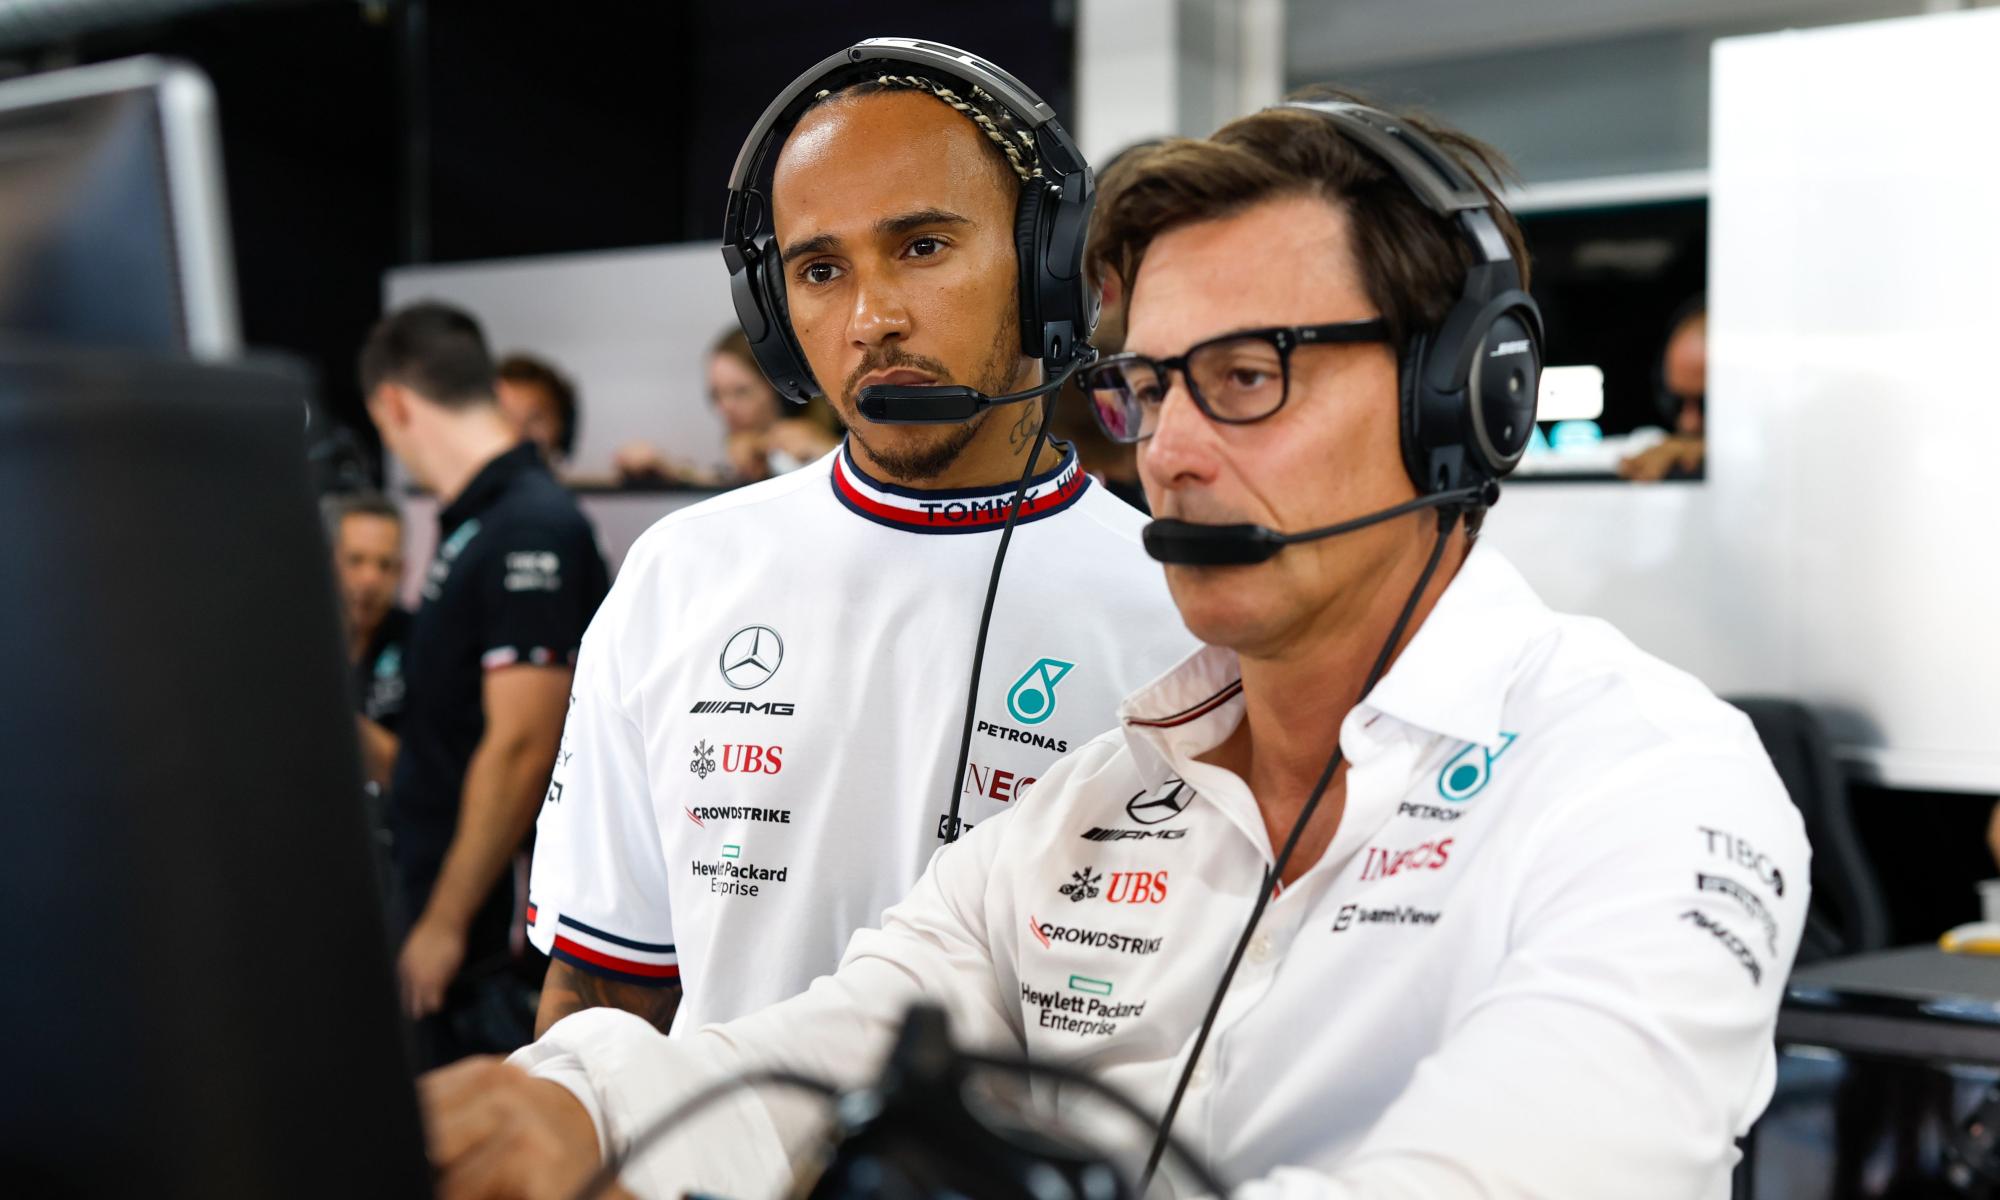 ferrari’s vasseur excited by hamilton move but has ‘difficult’ call with wolff